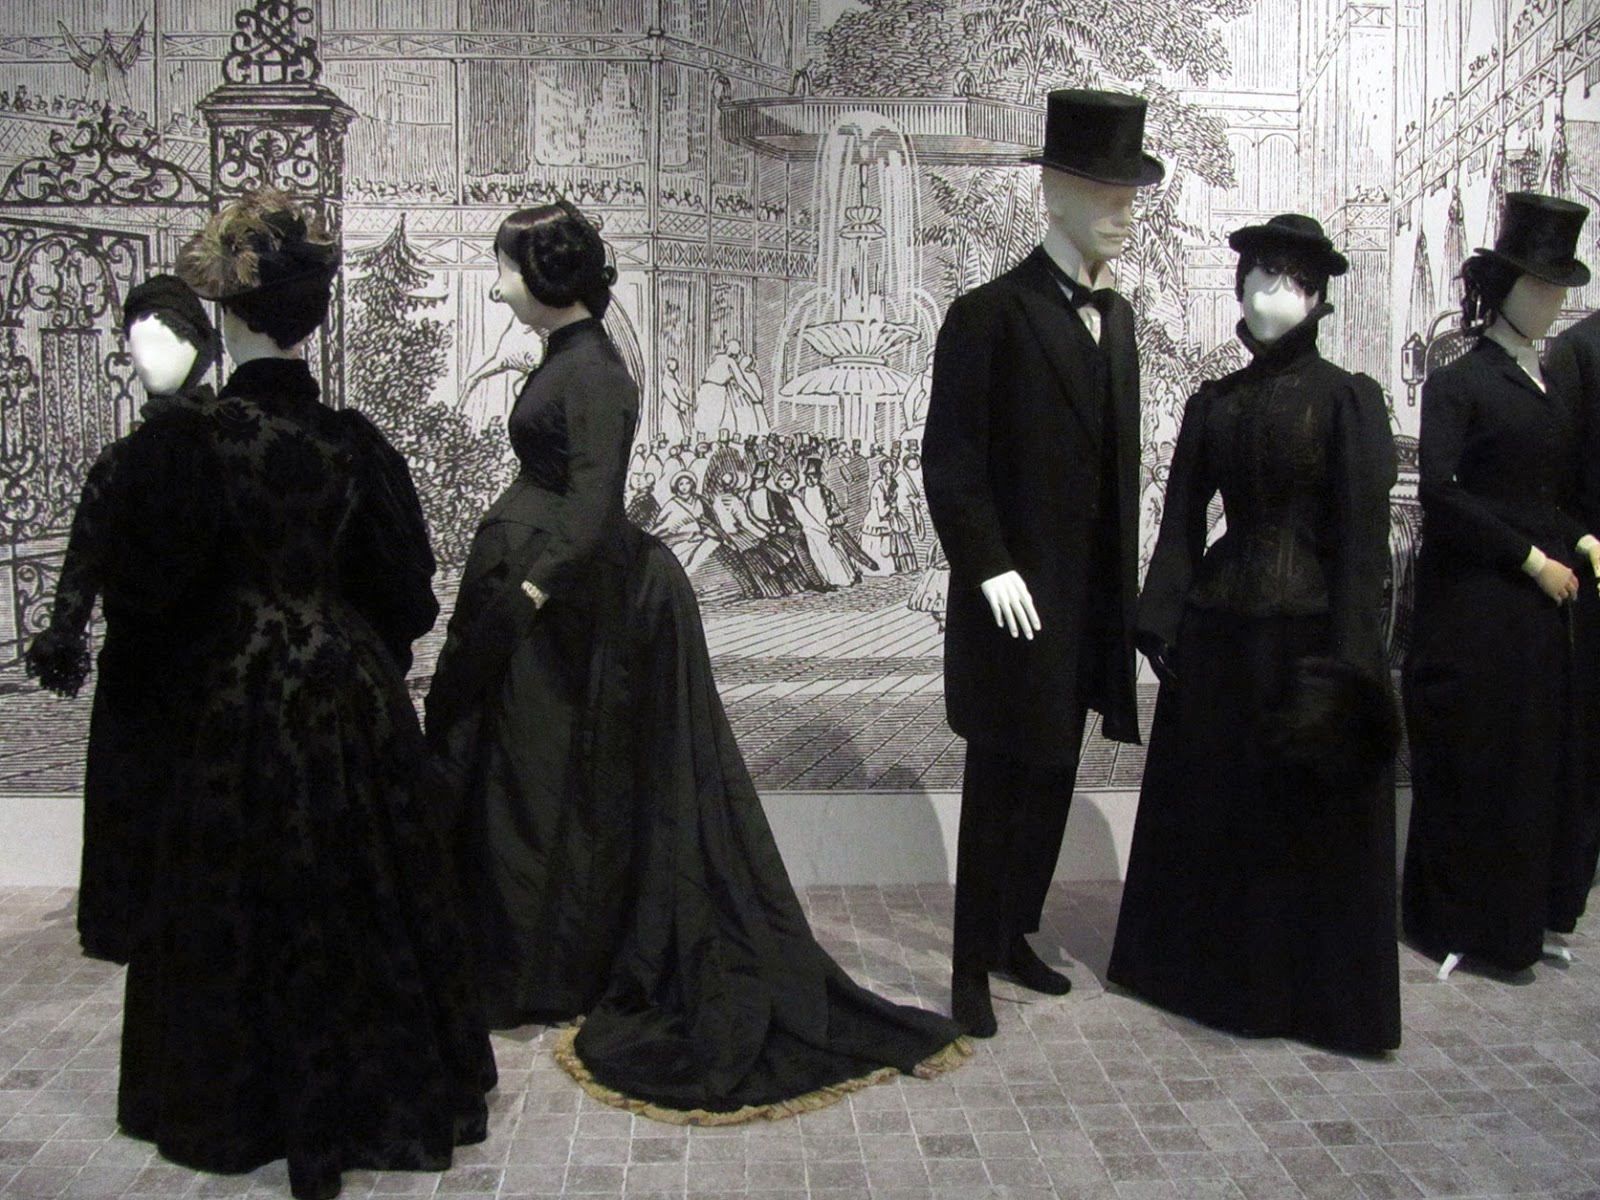 1880s: black gowns and suits